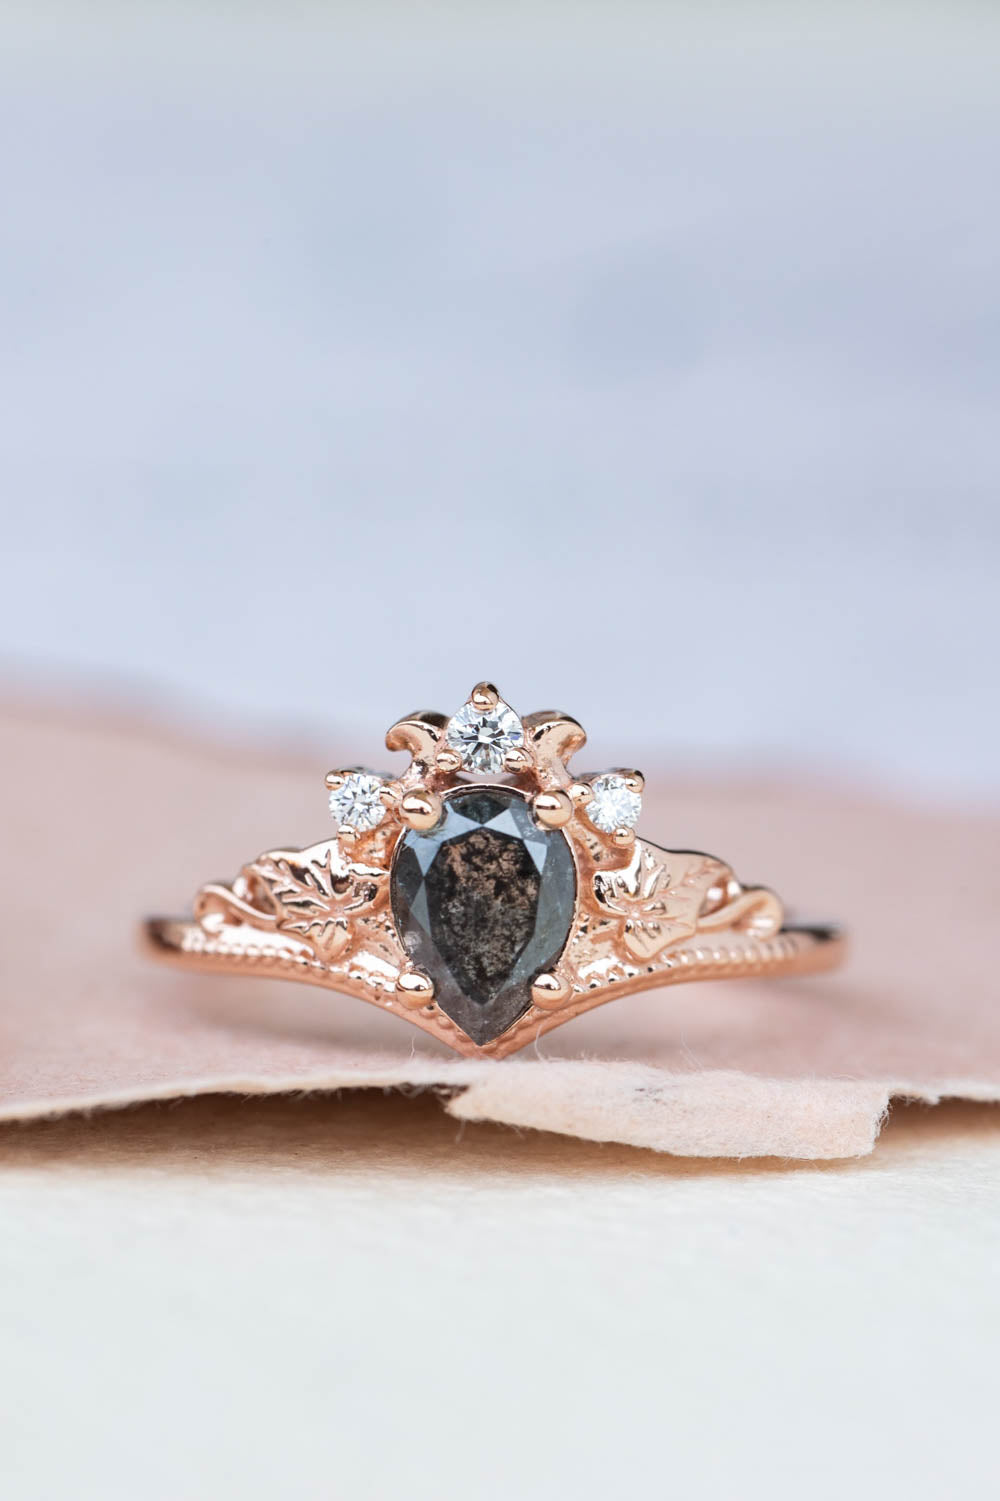 Pear salt and pepper diamond engagement ring, rose gold ivy leaves ring with diamonds / Ariadne - Eden Garden Jewelry™